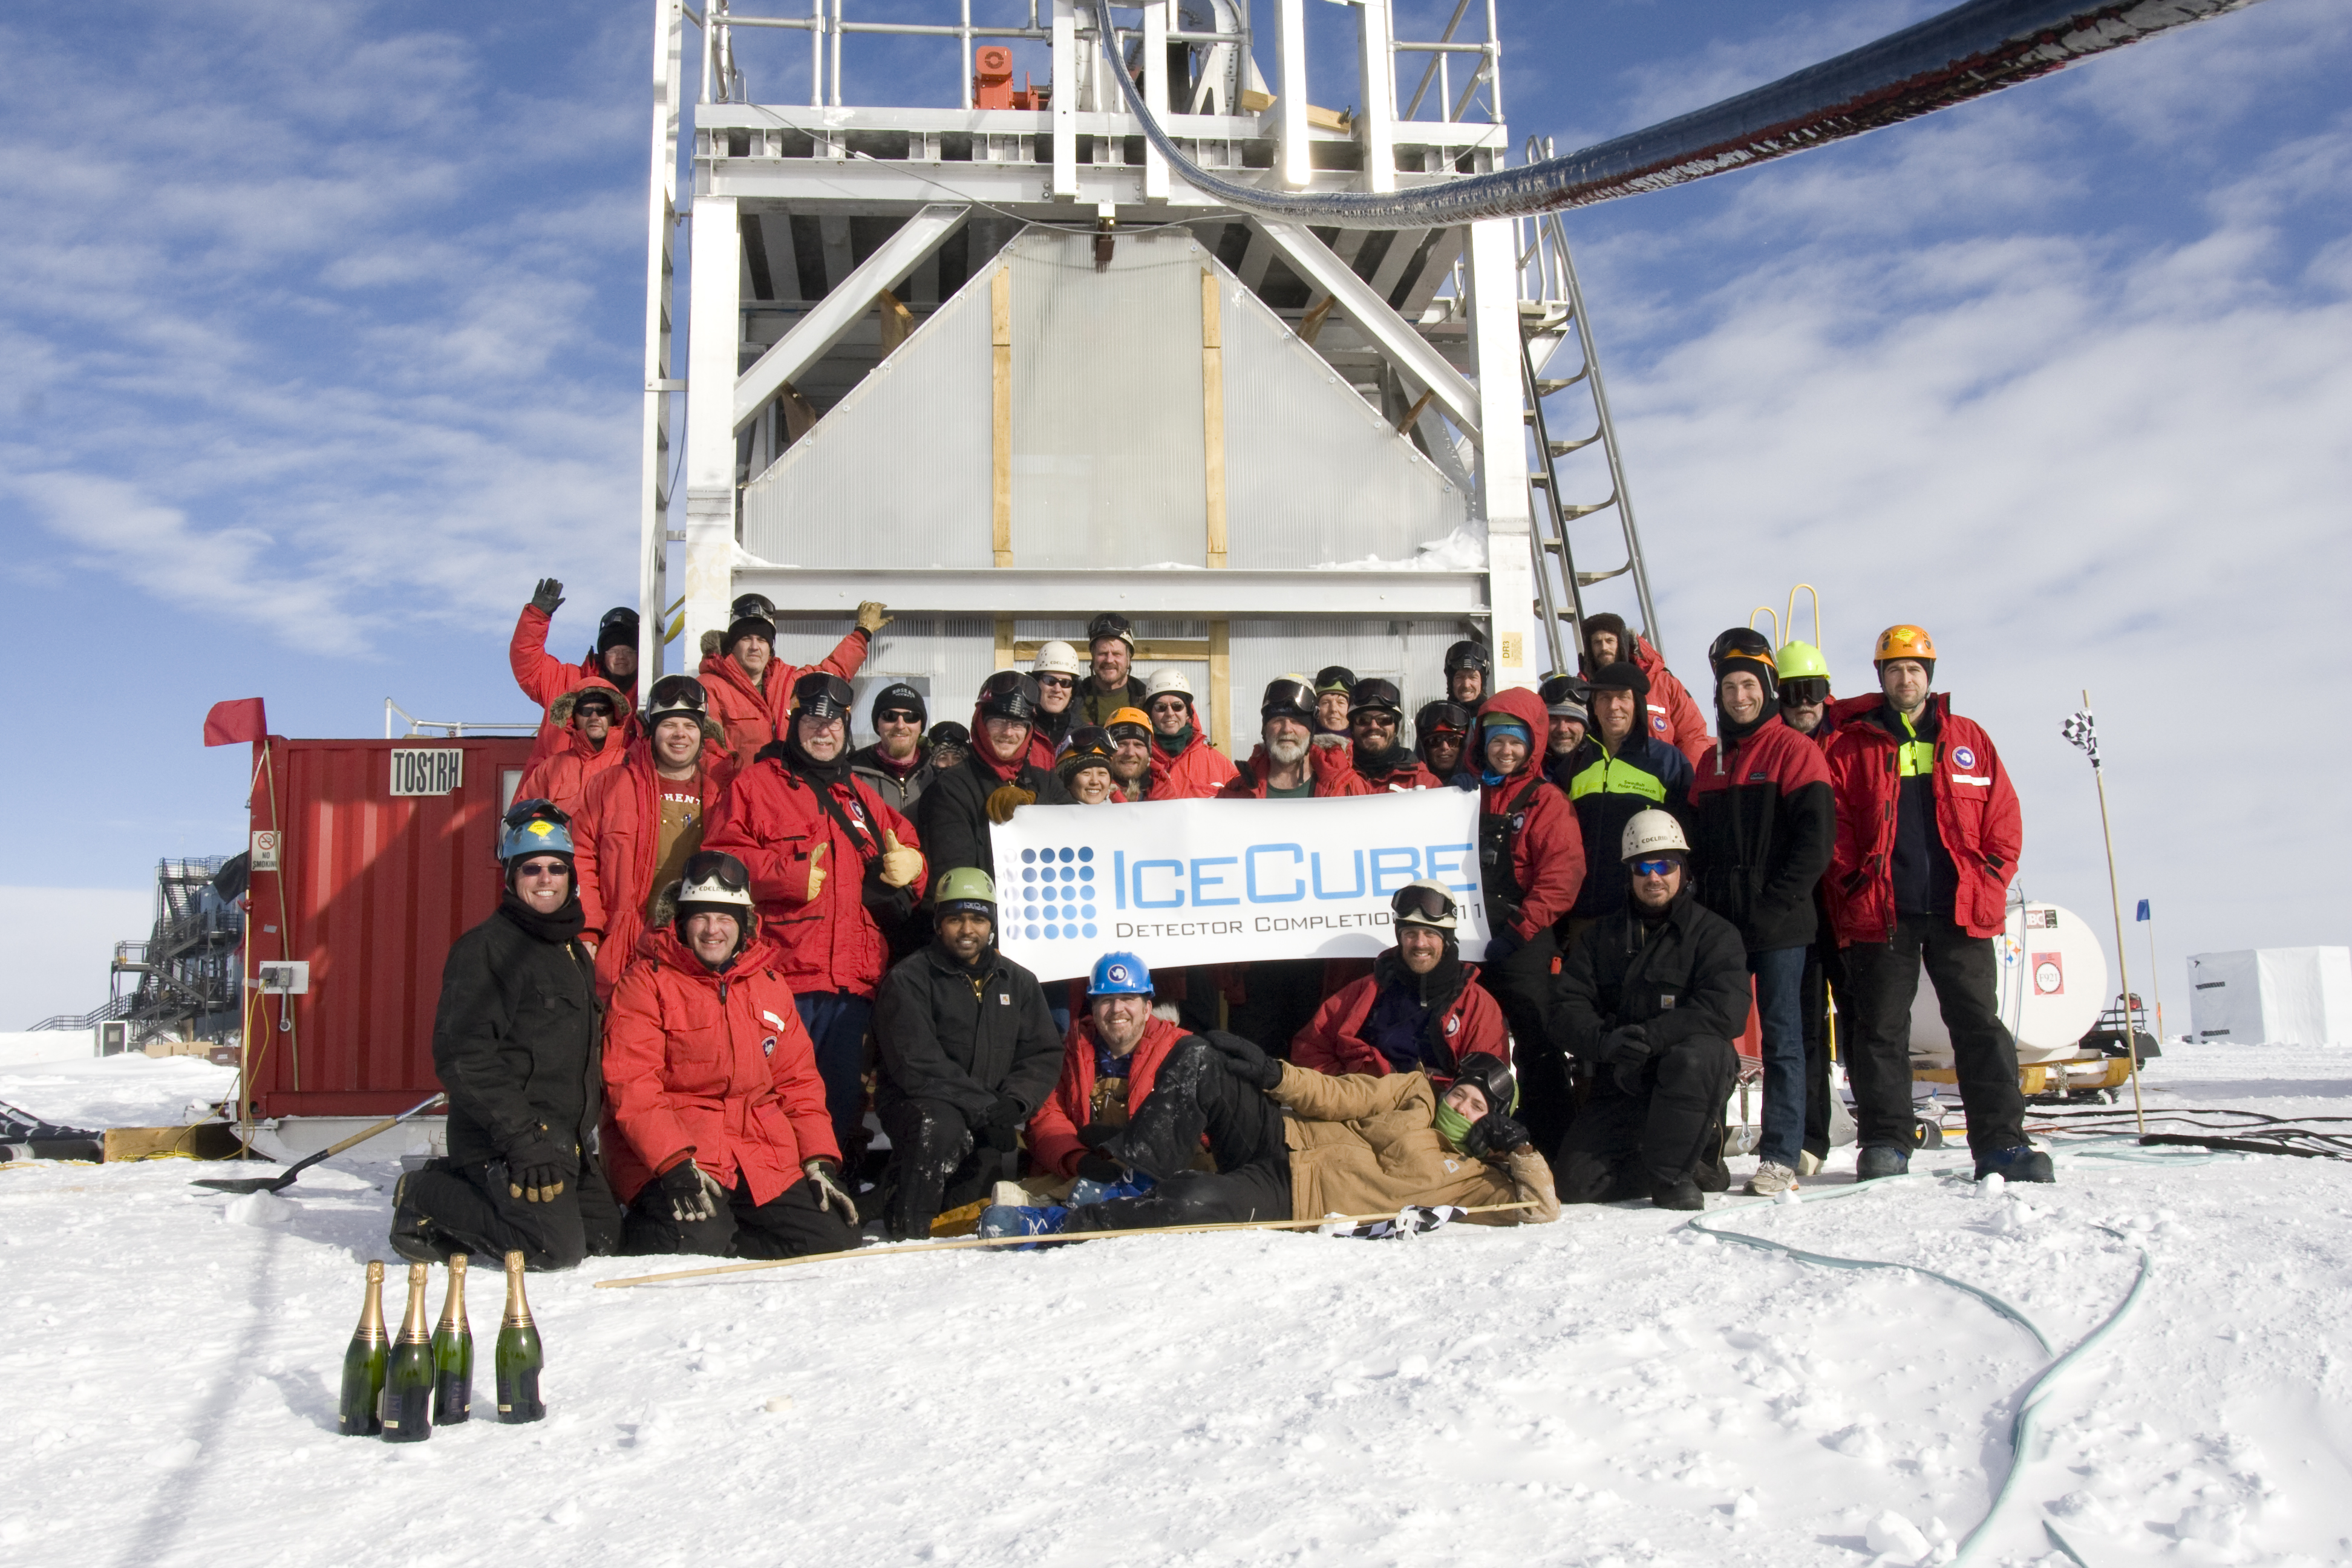 Completion of the IceCube Neutrino Observatory